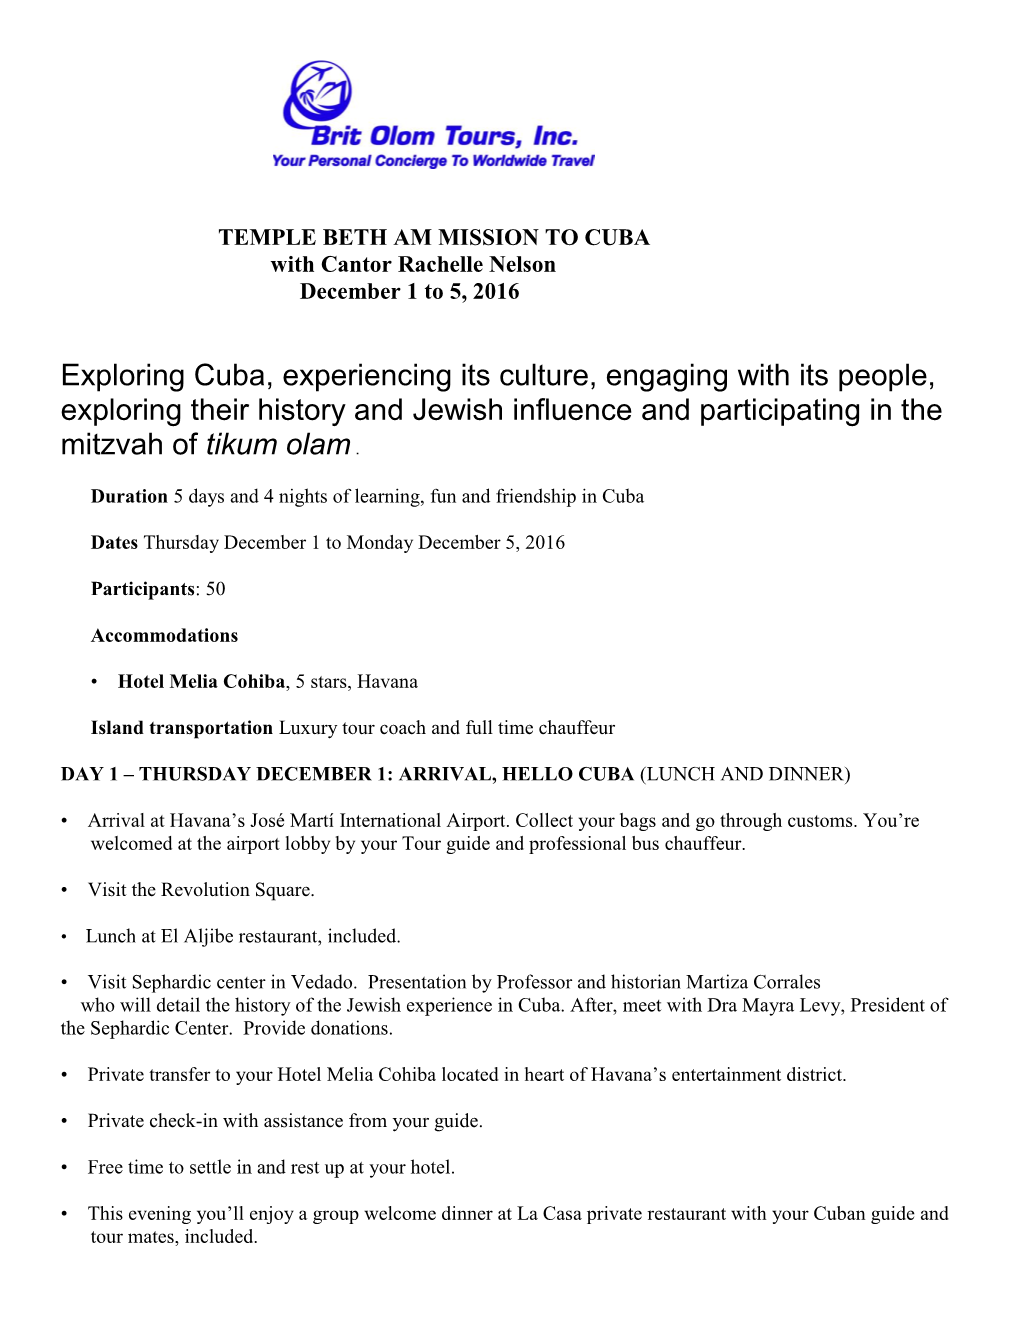 Exploring Cuba, Experiencing Its Culture, Engaging with Its People, Exploring Their History and Jewish Influence and Participating in the Mitzvah of Tikum Olam